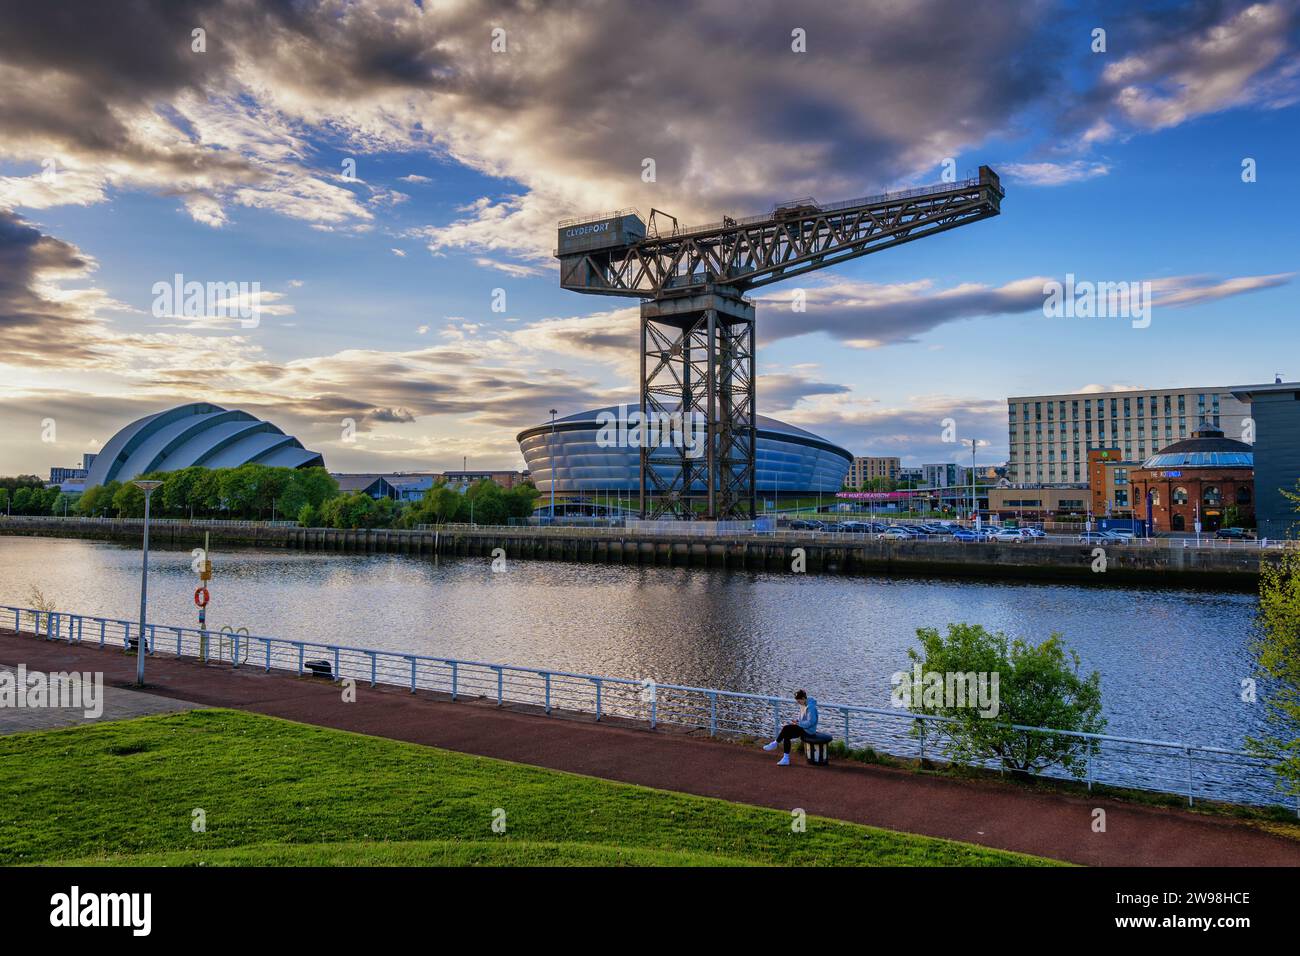 The Finnieston Crane and OVO Hydro indoor arena at River Clyde in city of Glasgow, Scotland, UK. Stock Photo